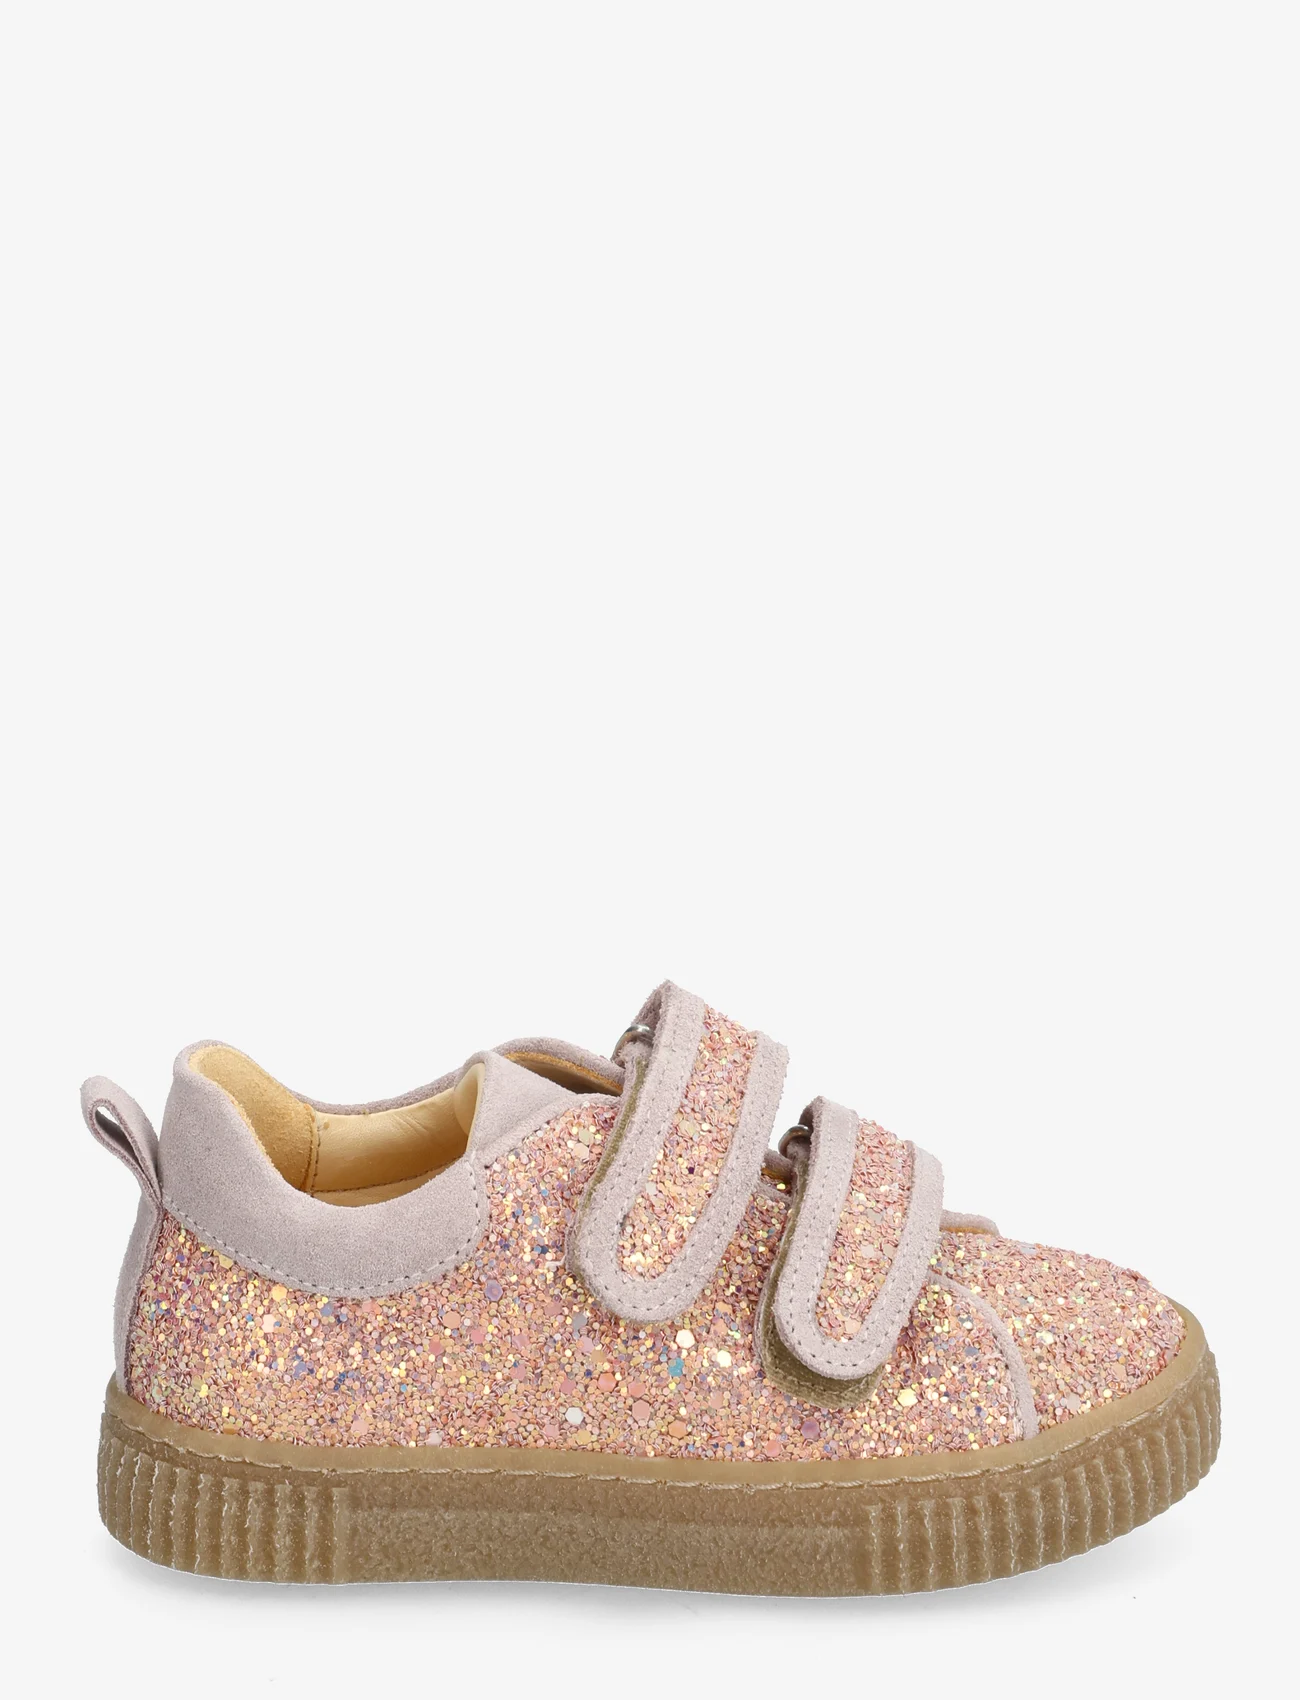 ANGULUS - Shoes - flat - with velcro - sommerschnäppchen - 2750/2731 rose glitter/pale ro - 1